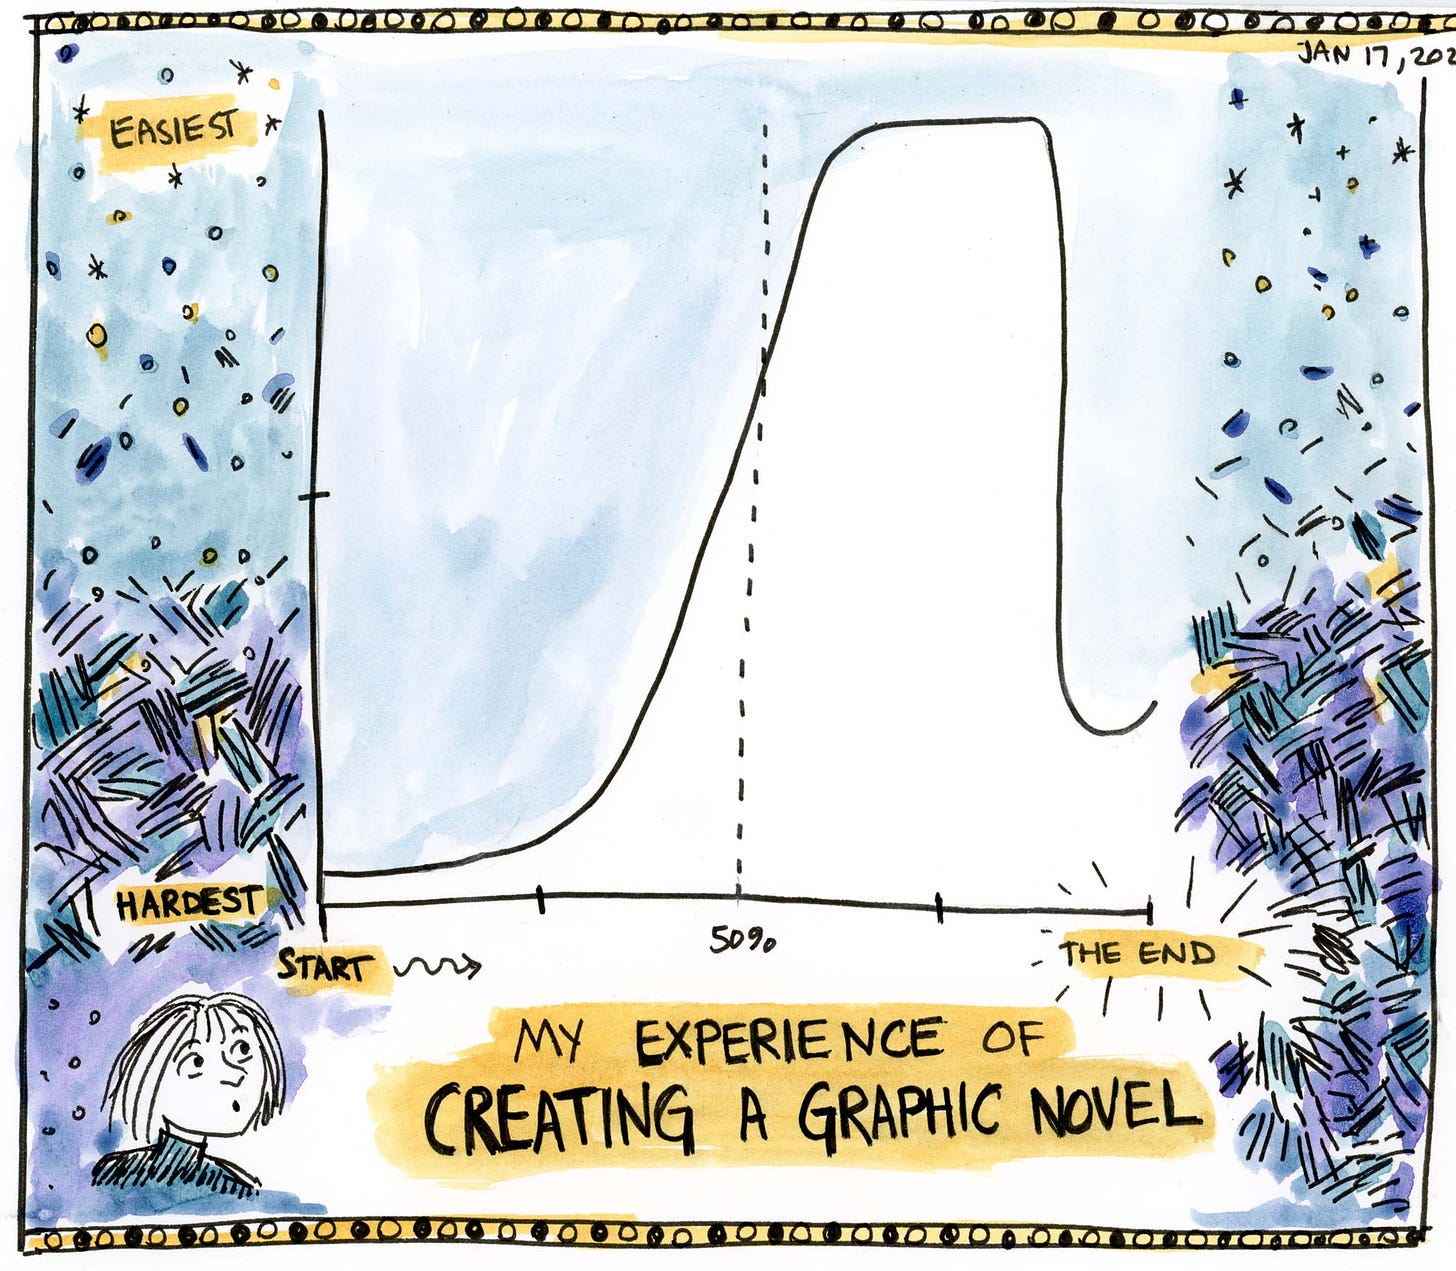 Diary comic by K. Woodman-Maynard of her experience creating a graphic novel